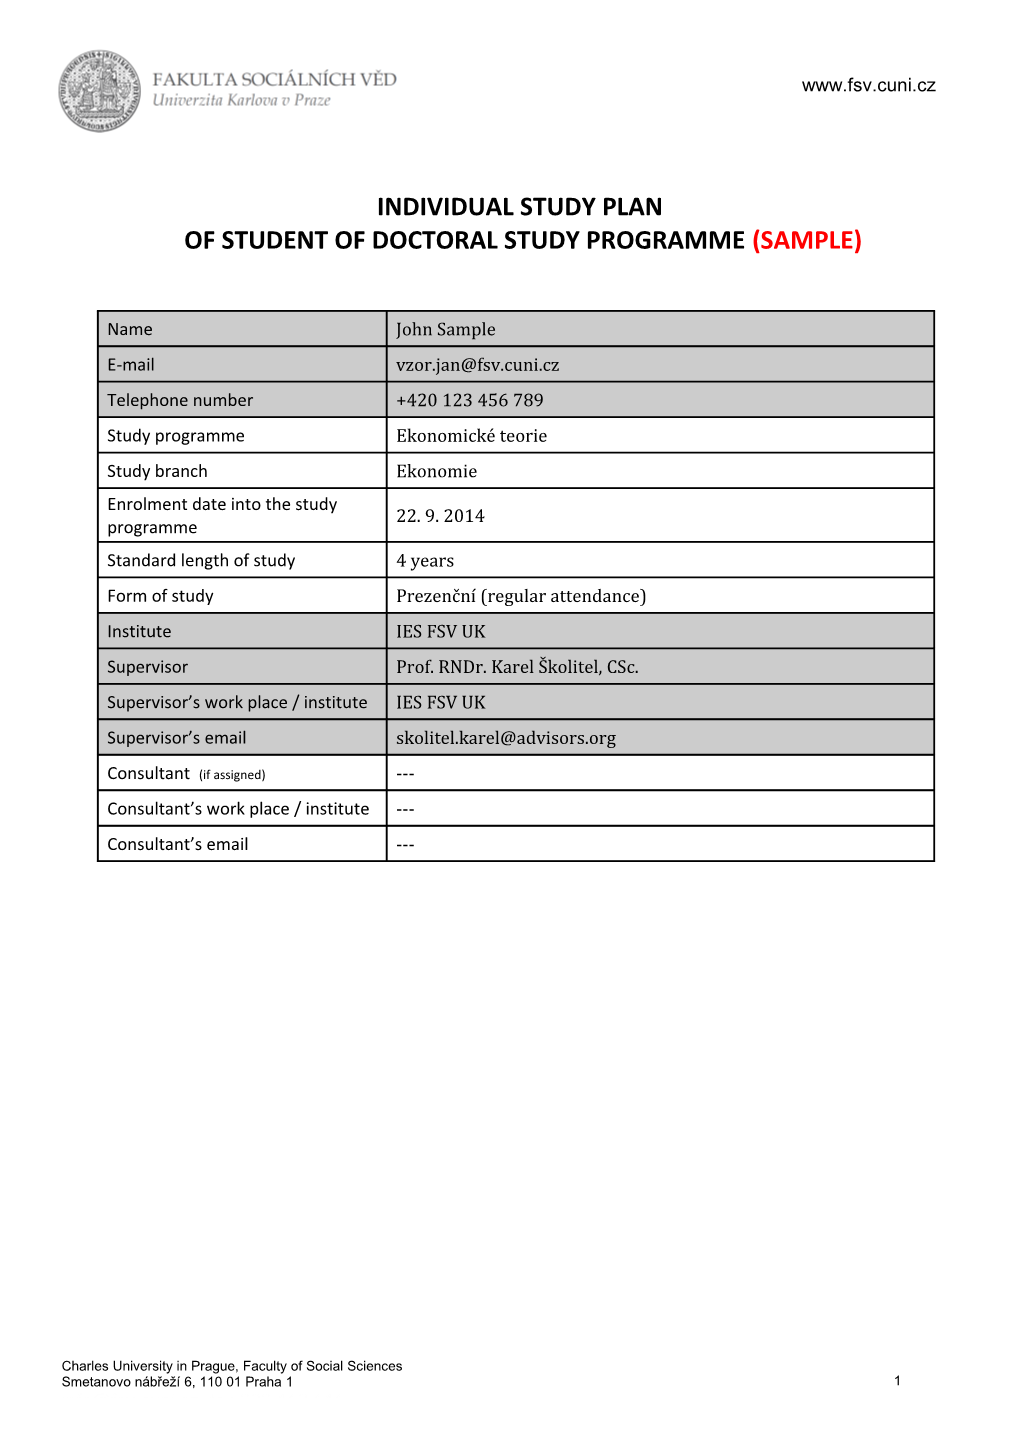 Of Student of Doctoral Study Programme (Sample)